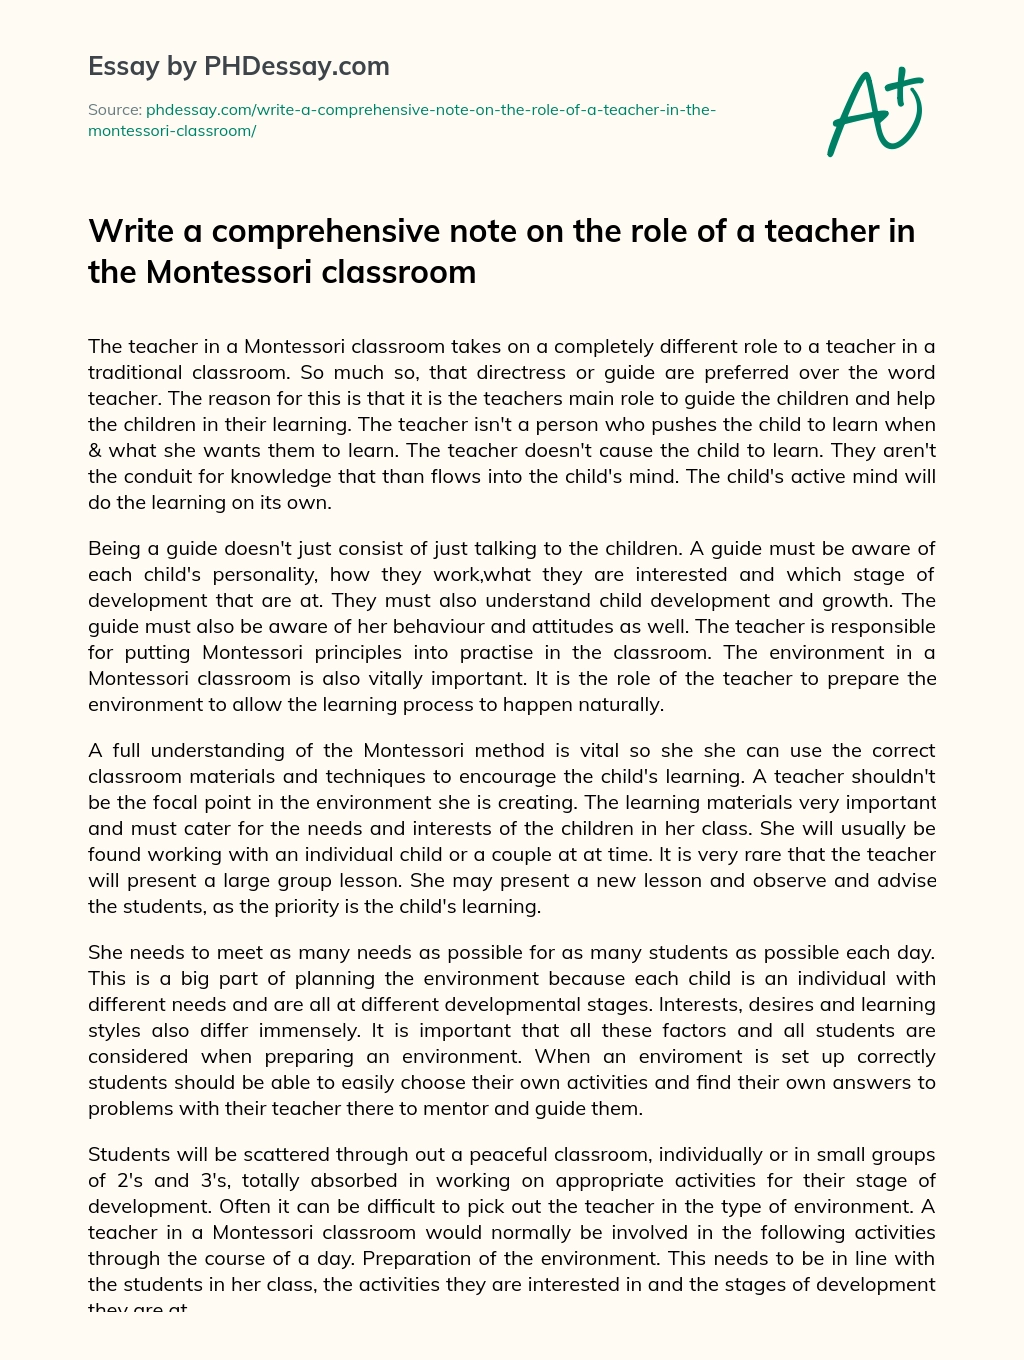 Write a comprehensive note on the role of a teacher in the Montessori classroom essay